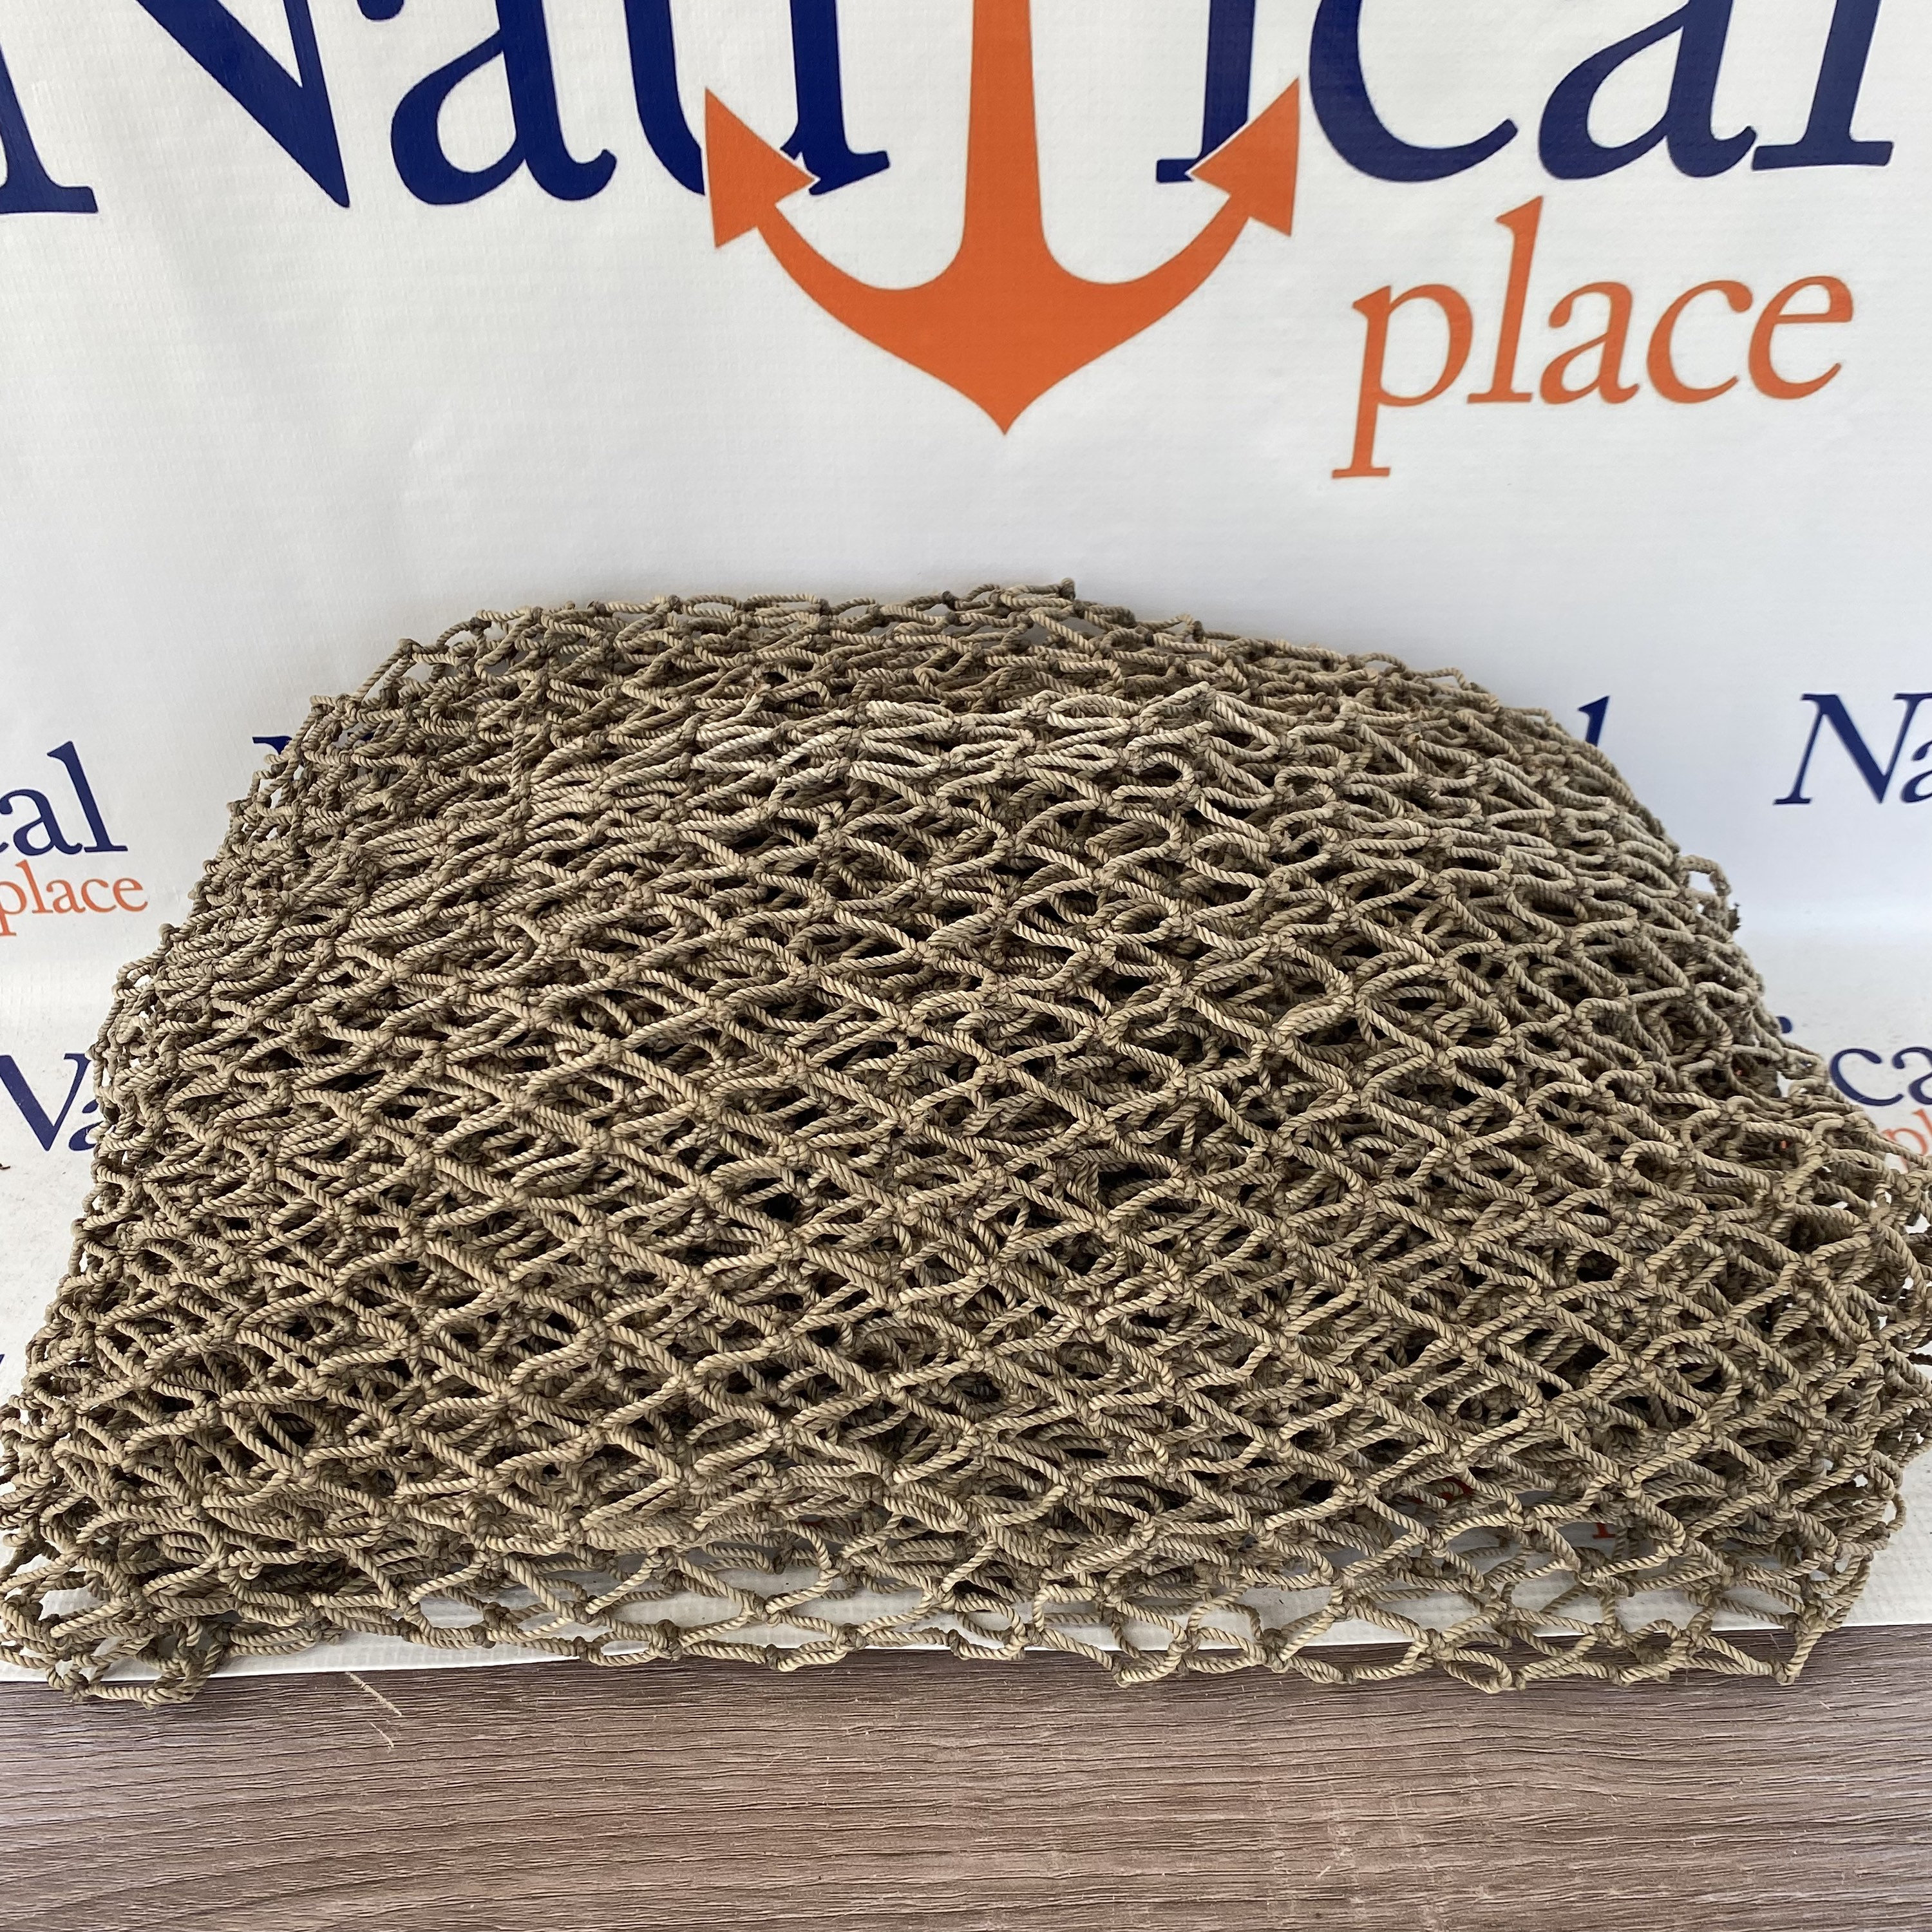 Real Genuine Fish Net, 10'x10', Super Strong Netting for Camouflage, Military  Surplus, Camo Ghillie Suit, Hunting Blinds -  Israel